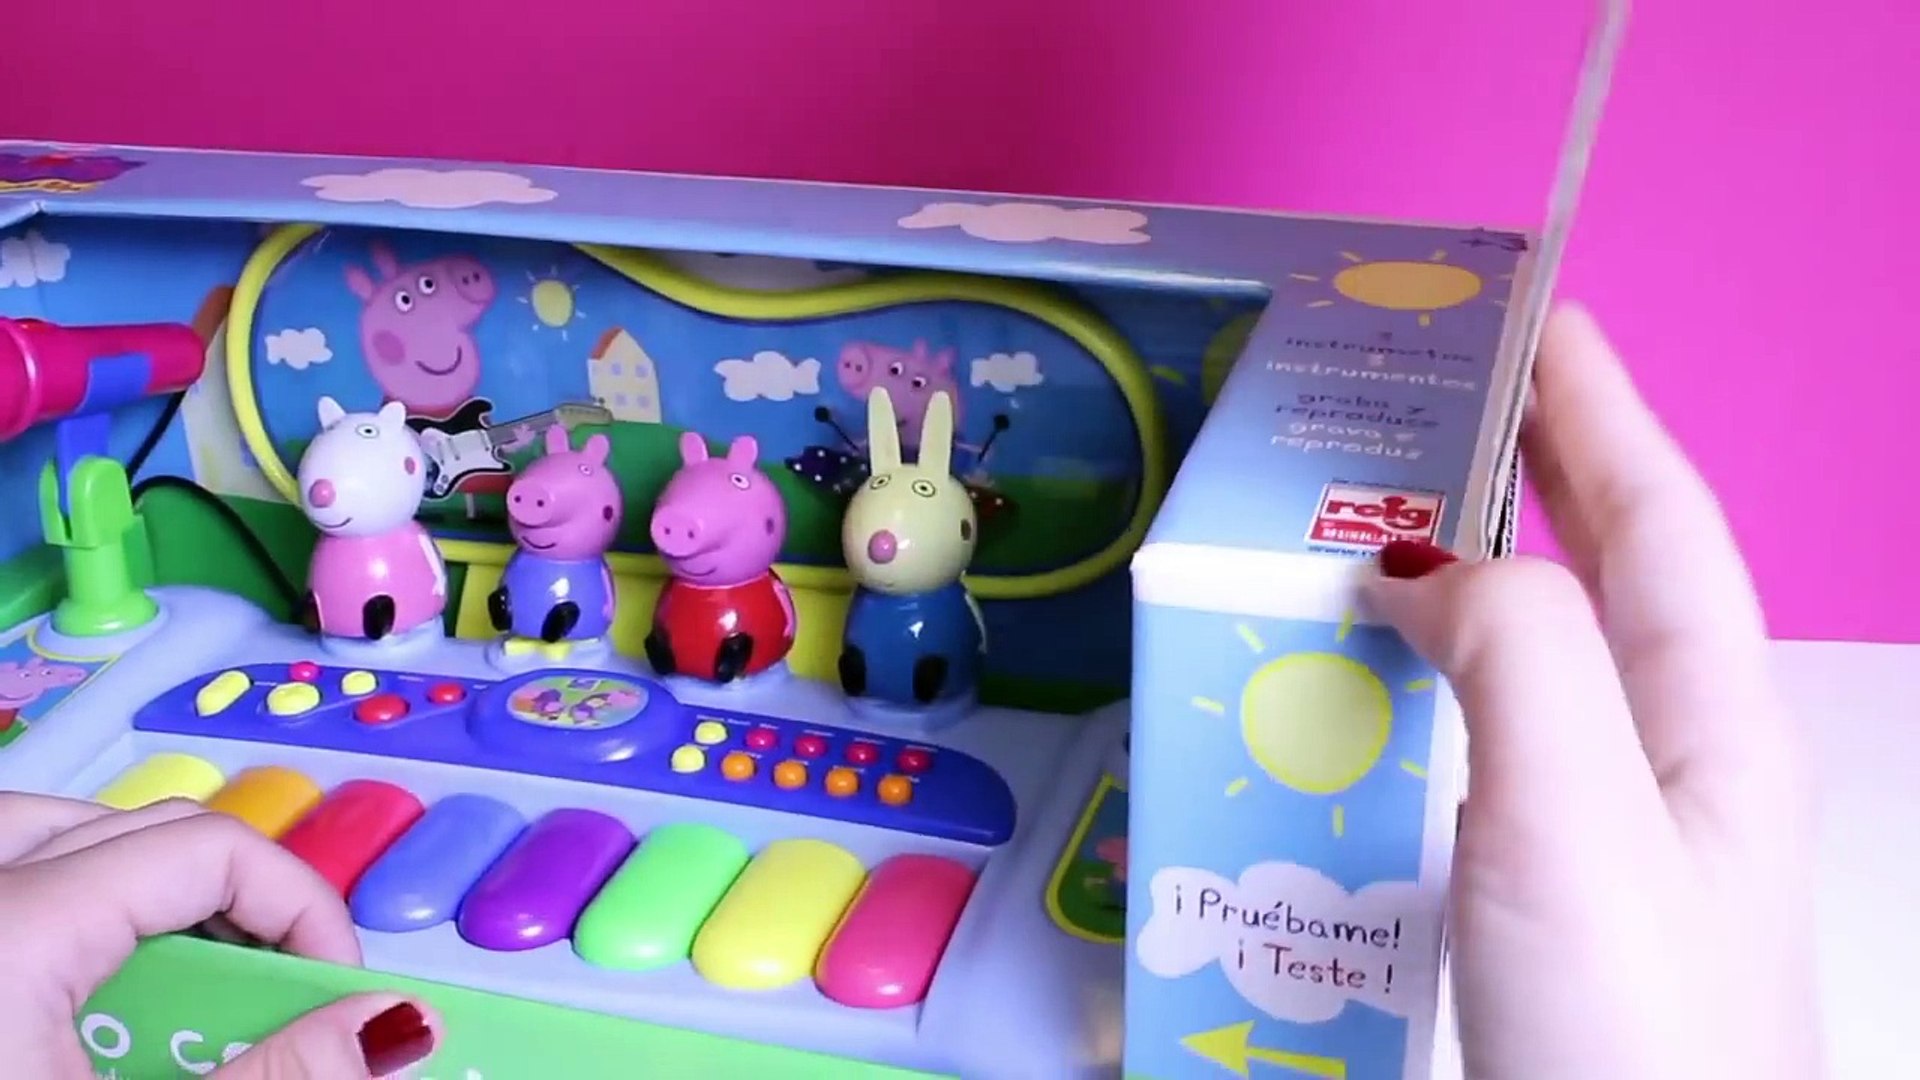 Peppa Pig Keyboard Piano with Microphone with Peppas Friends Organo con  Micrófono de Peppa Pig - video Dailymotion